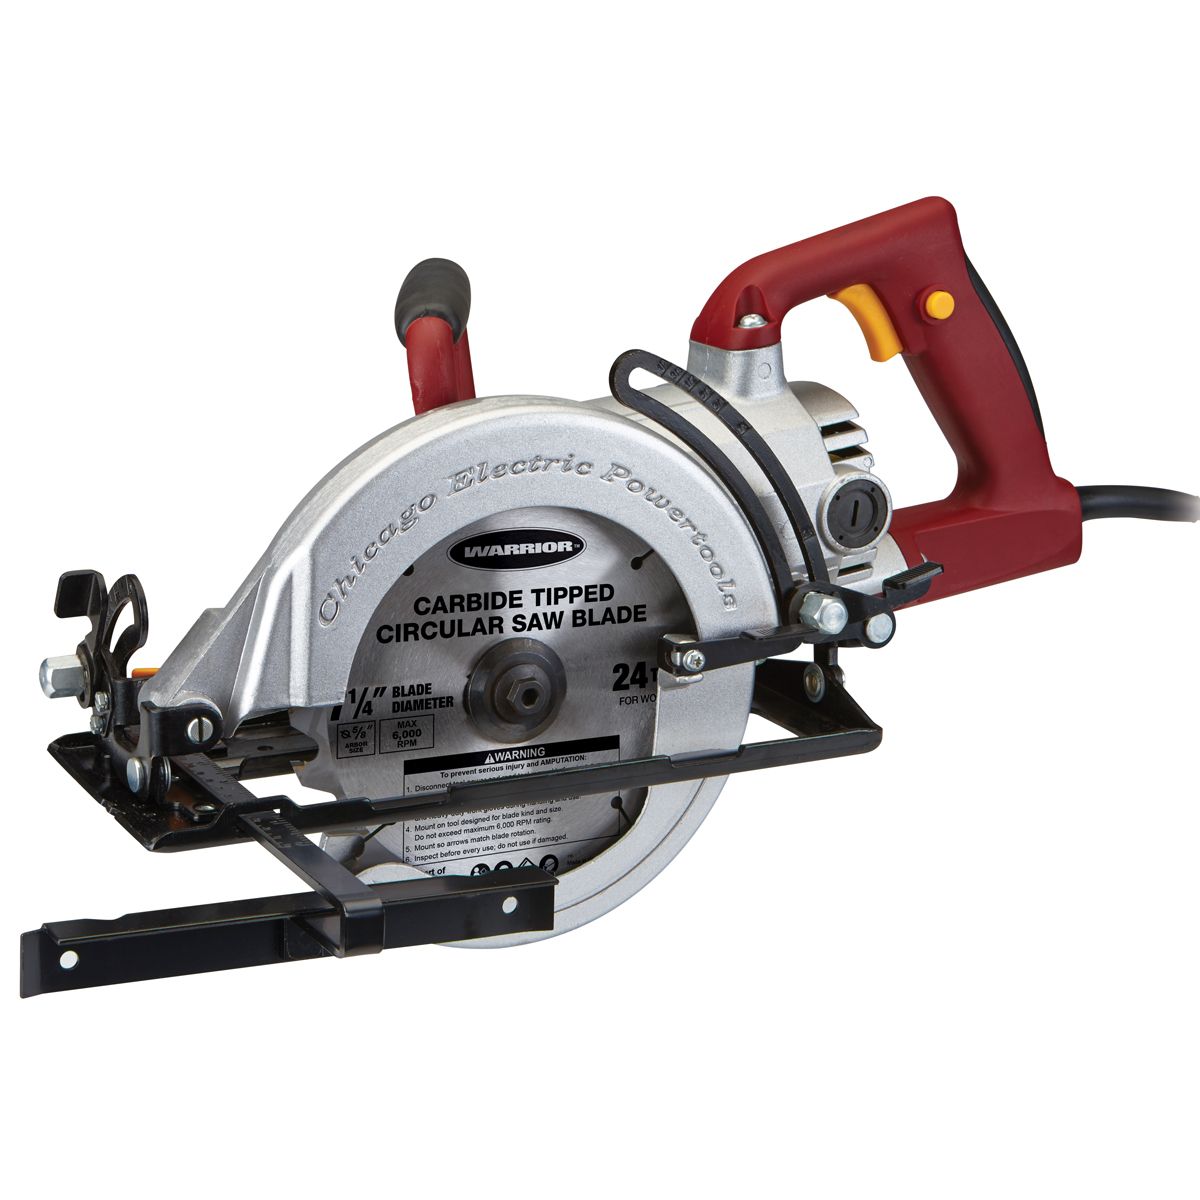 CHICAGO ELECTRIC POWER TOOLS PROFESSIONAL SERIES 13 Amp 7-1/4 in. Worm Drive Framing Saw